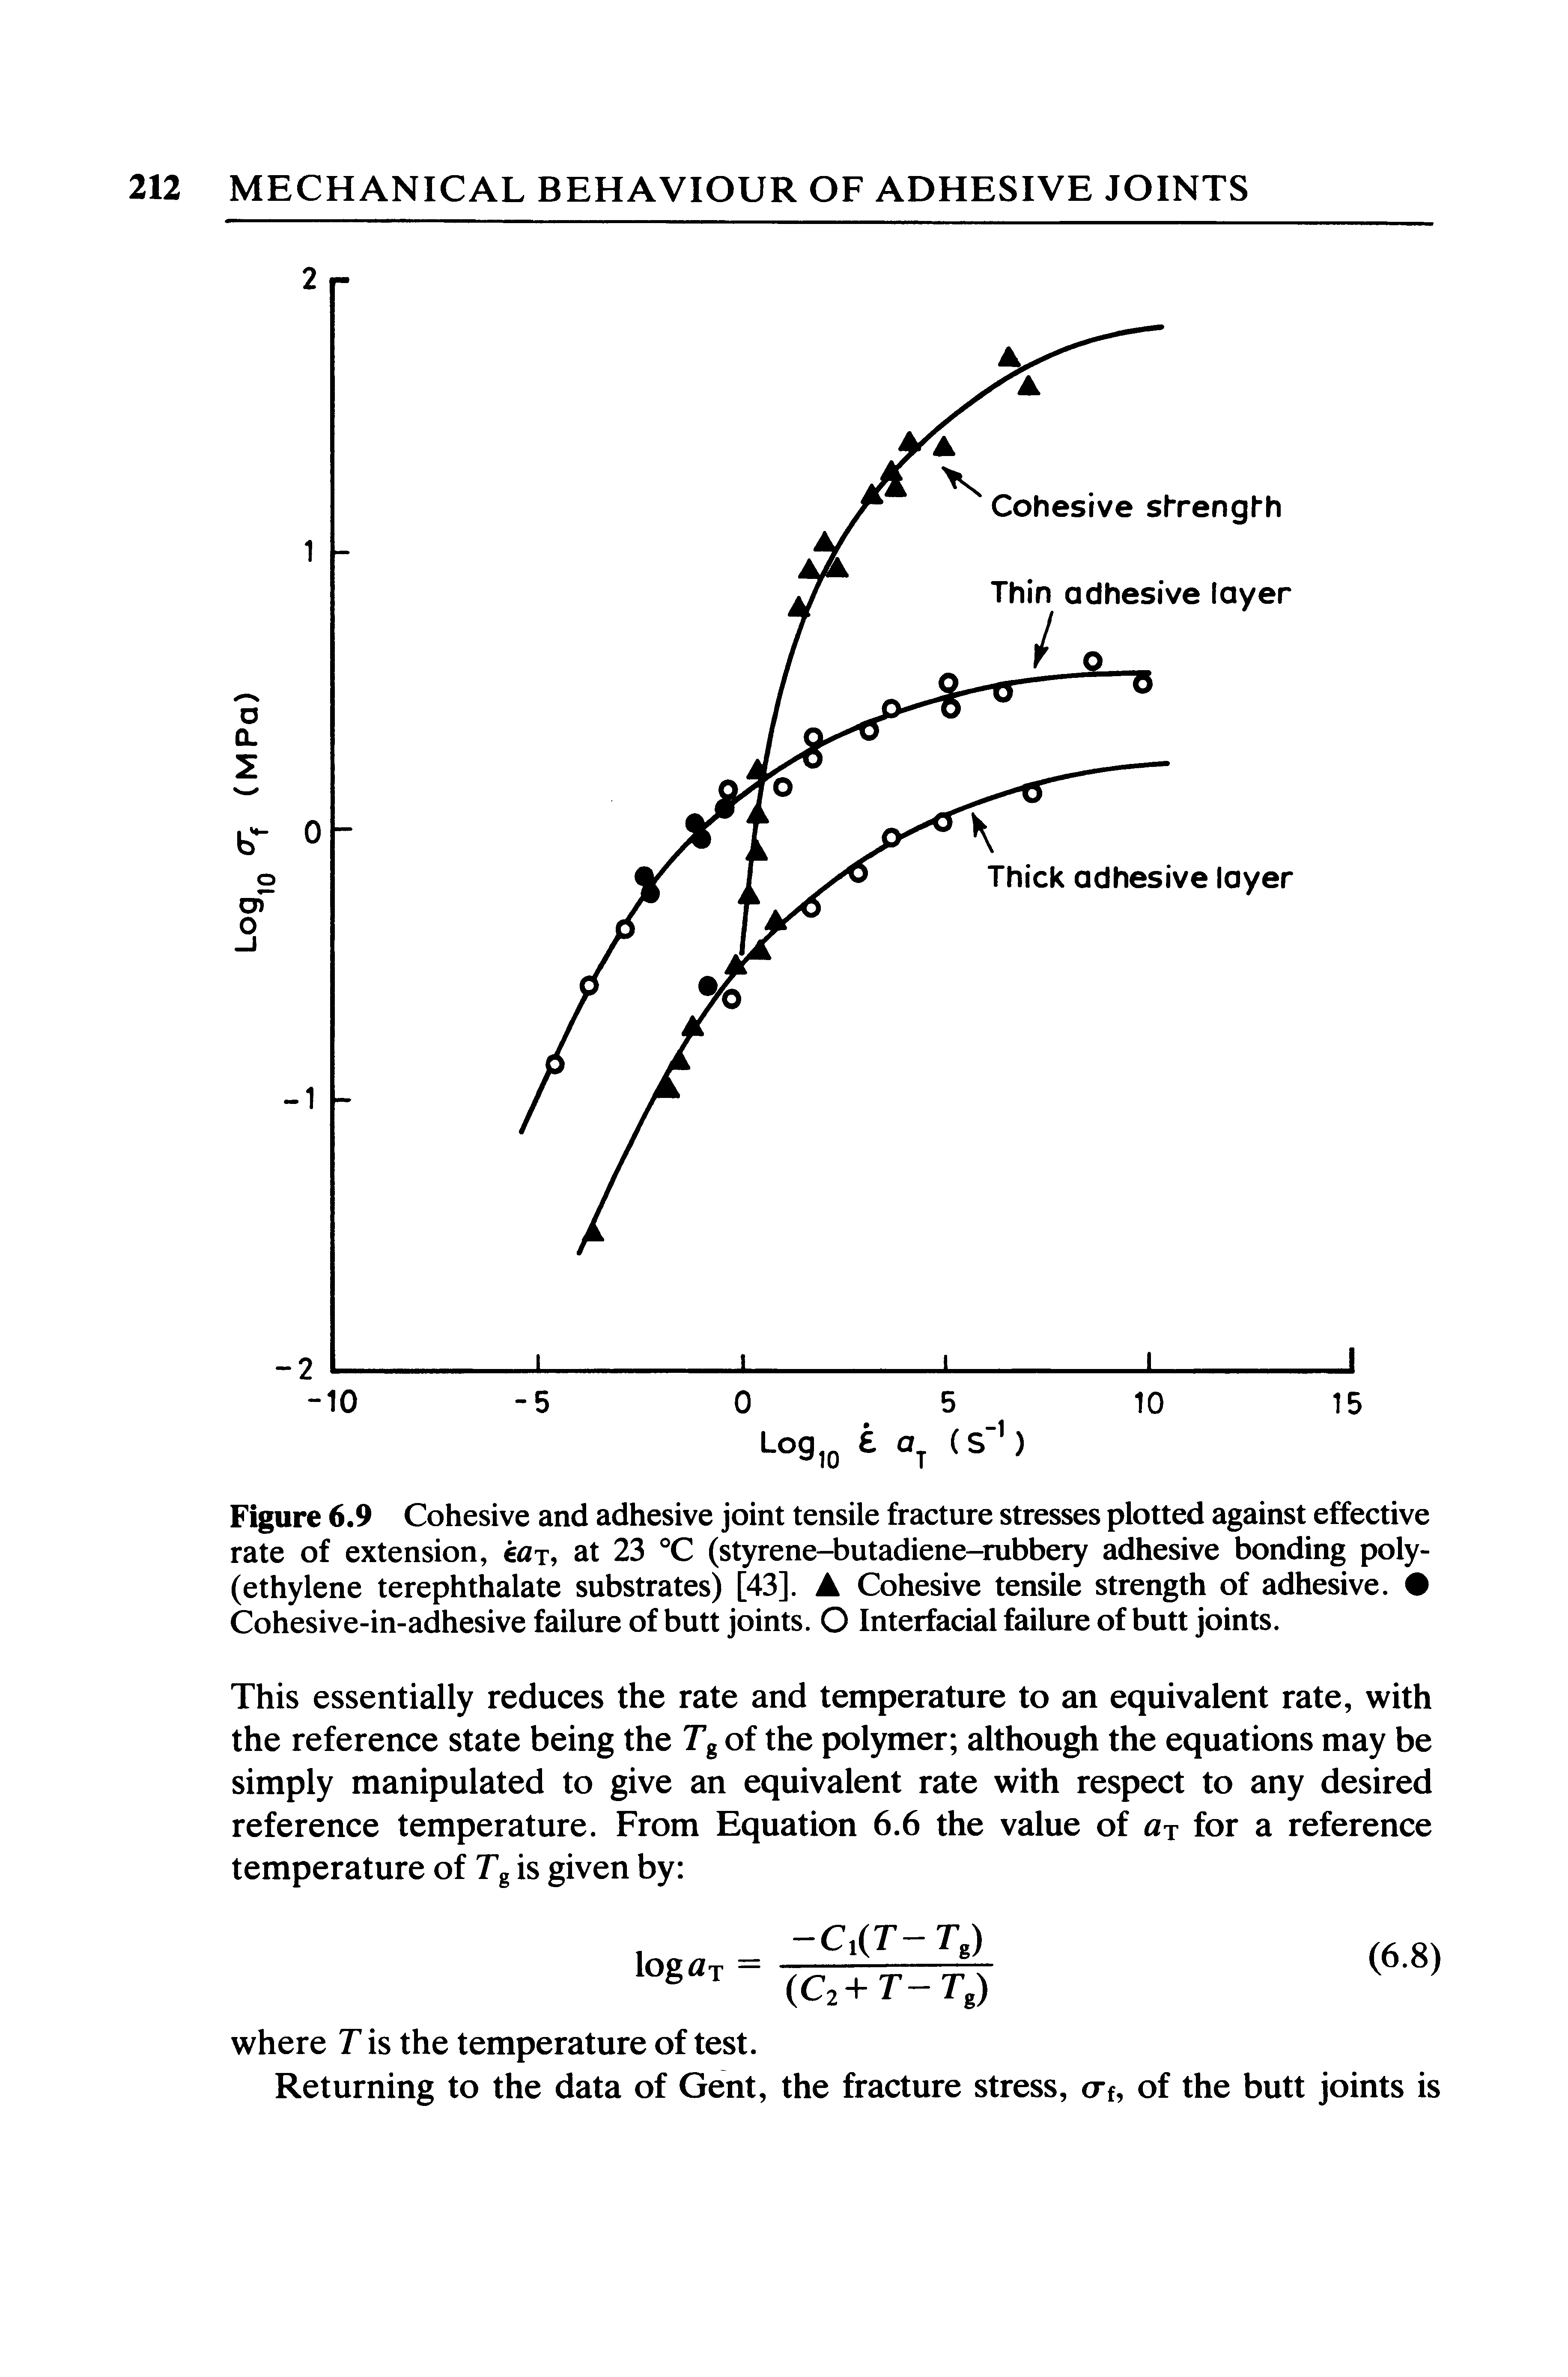 Figure 6.9 Cohesive and adhesive joint tensile fracture stresses plotted against effective rate of extension, kaj, at 23 °C (styrene-butadiene-rubbery adhesive bonding poly-(ethylene terephthalate substrates) [43]. A Cohesive tensile strength of adhesive. Cohesive-in-adhesive failure of butt joints. O Interfacial failure of butt joints.